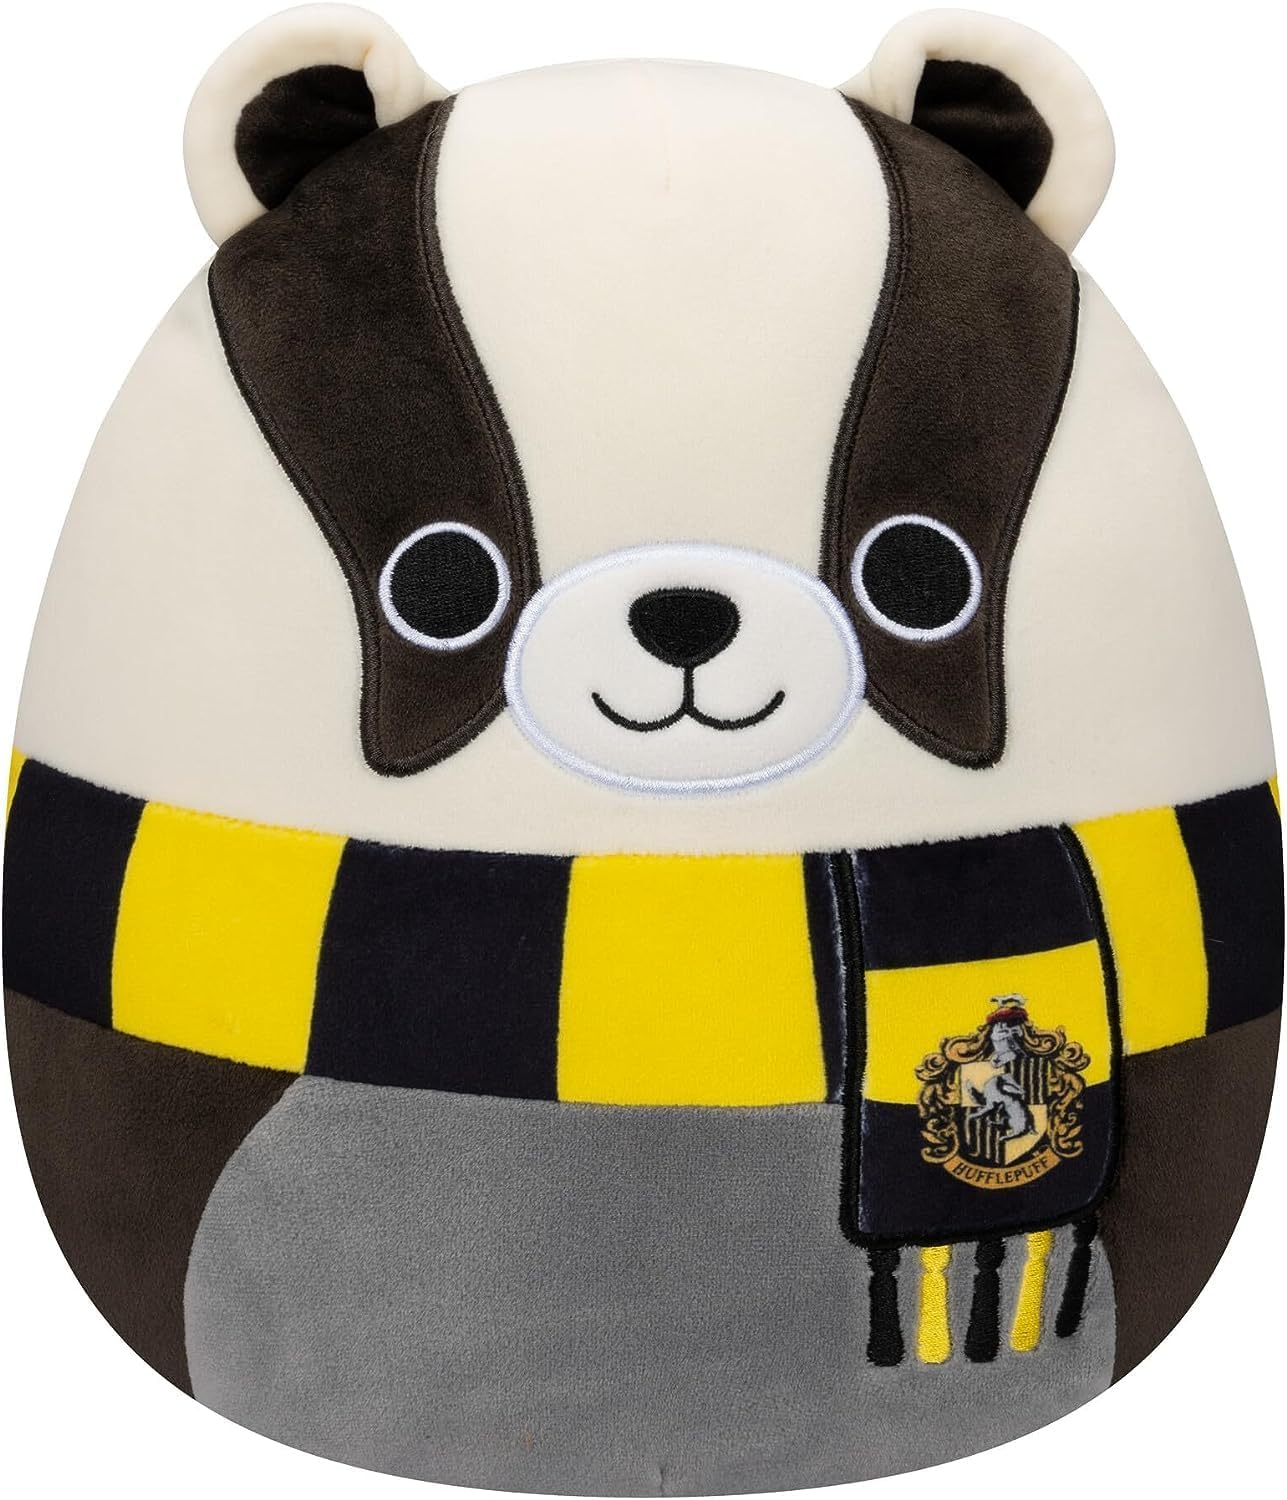 Hufflepuff the Badger 8” Squishmallow - Harry Potter House Animals